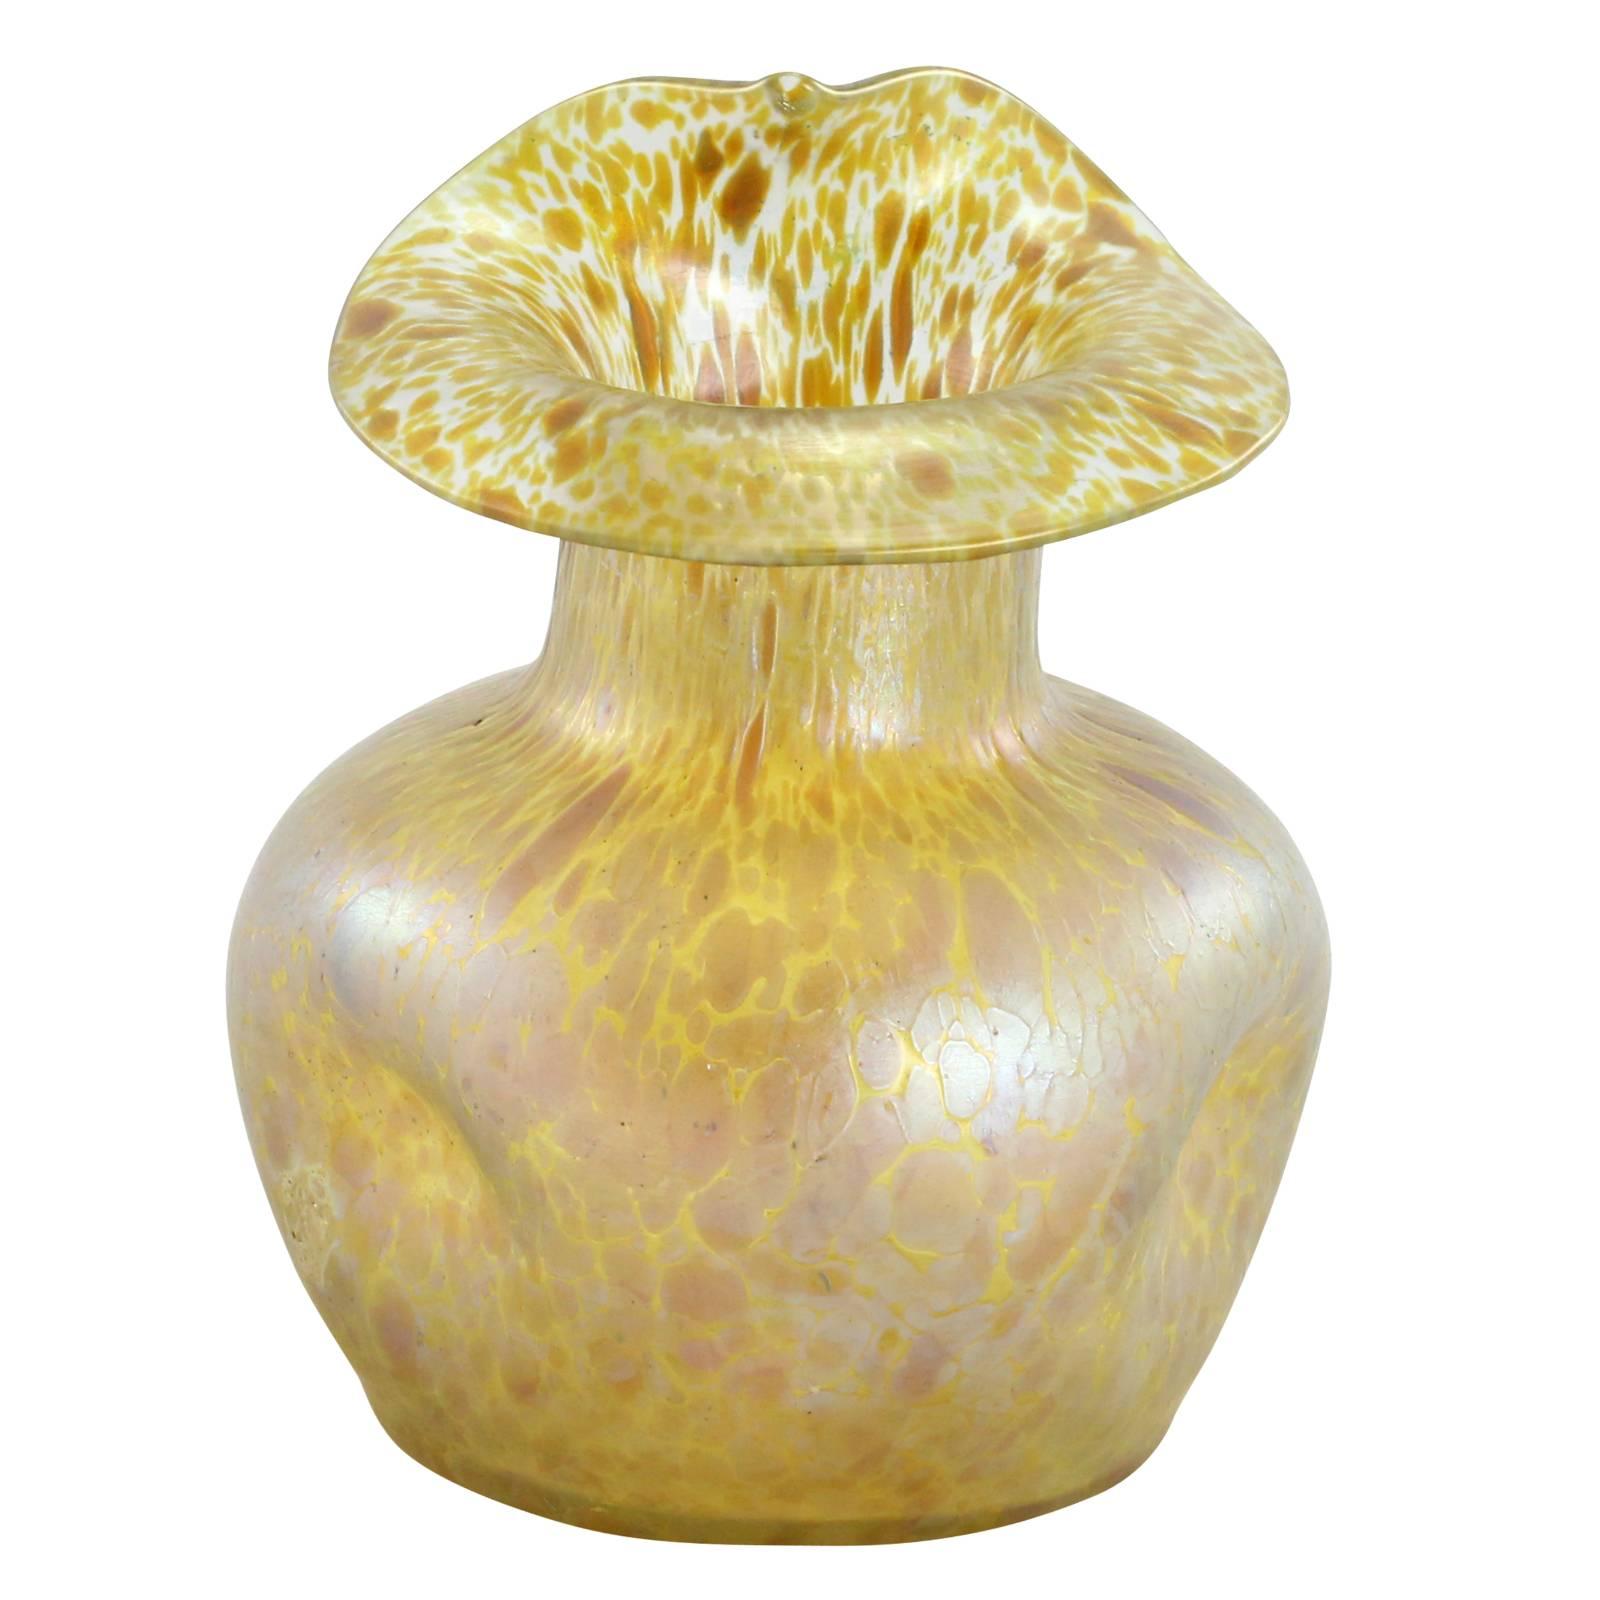 A late 19th century Art Nouveau glass vase in the 'Papillon' decor on a Candia ground, by Bohemian glassmakers Loetz. The piece features a 'jack-in-the-pulpit' style rim, with the body being dimpled on three sides.